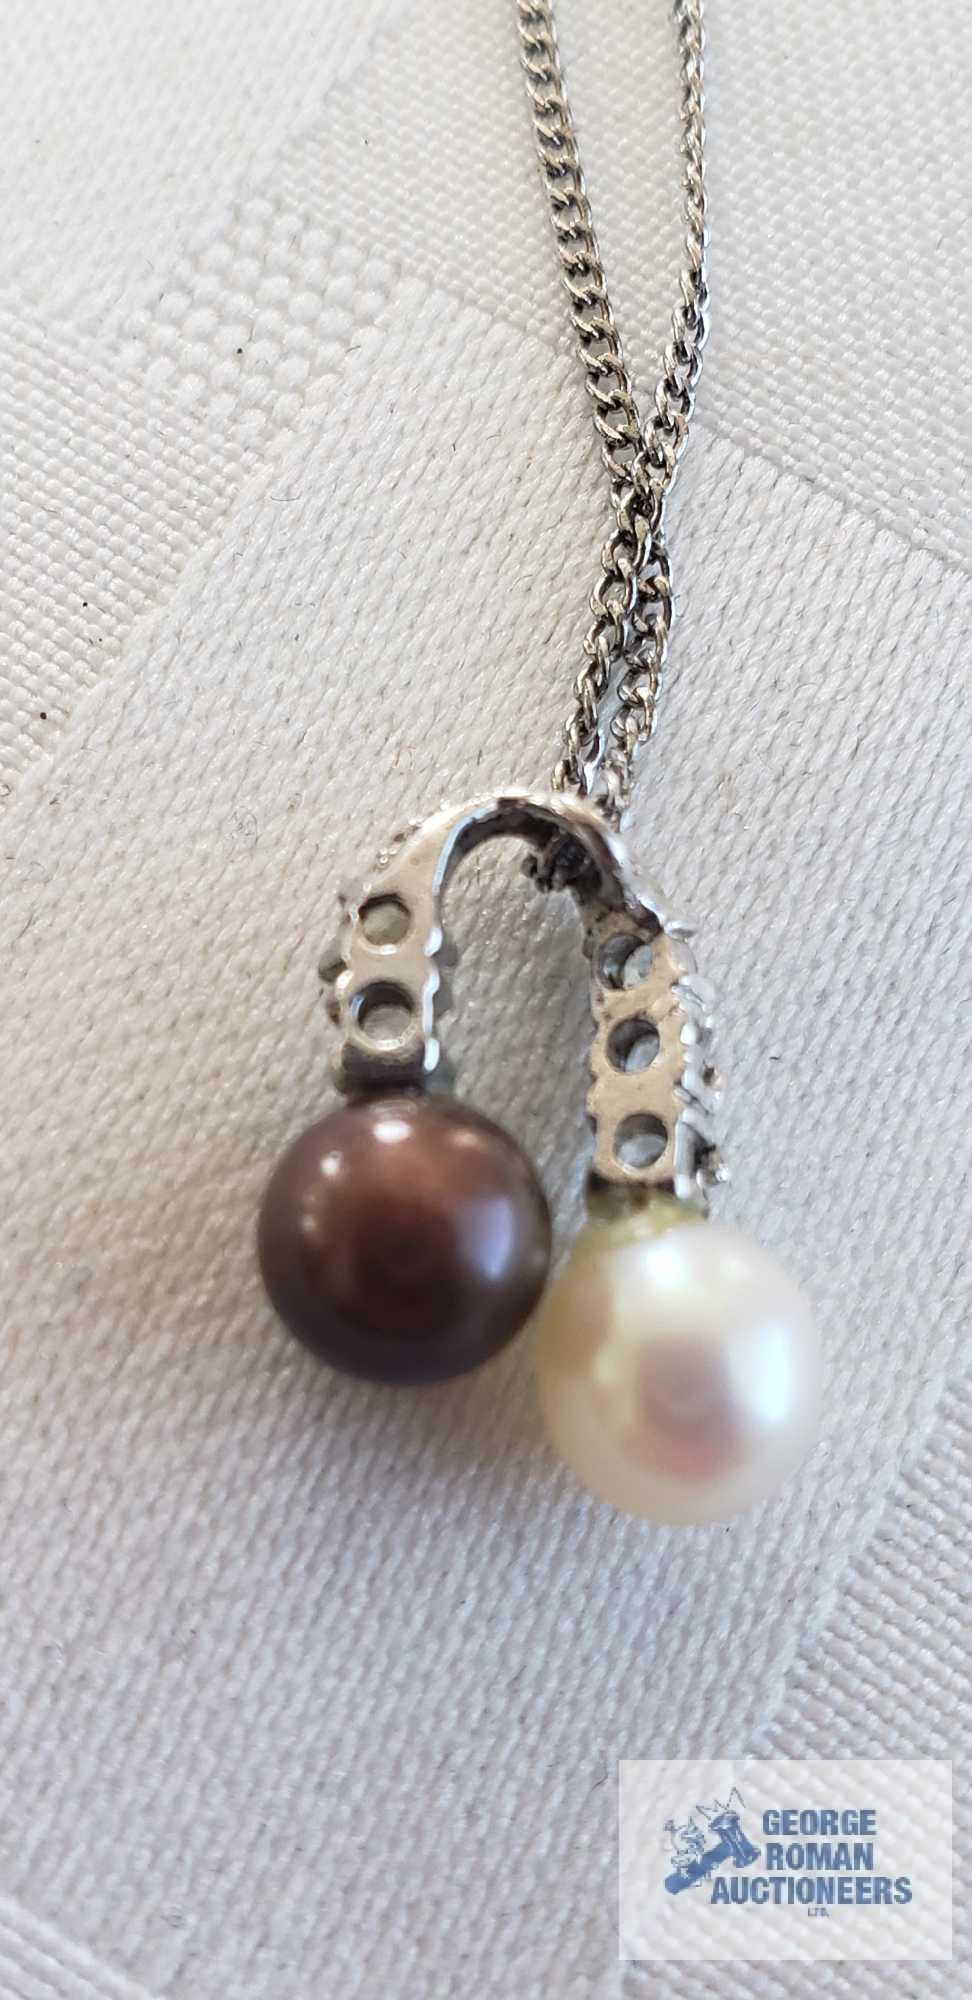 Two pearl like beads with clear gemstone charm on silver colored chain, chain marked 925 and other